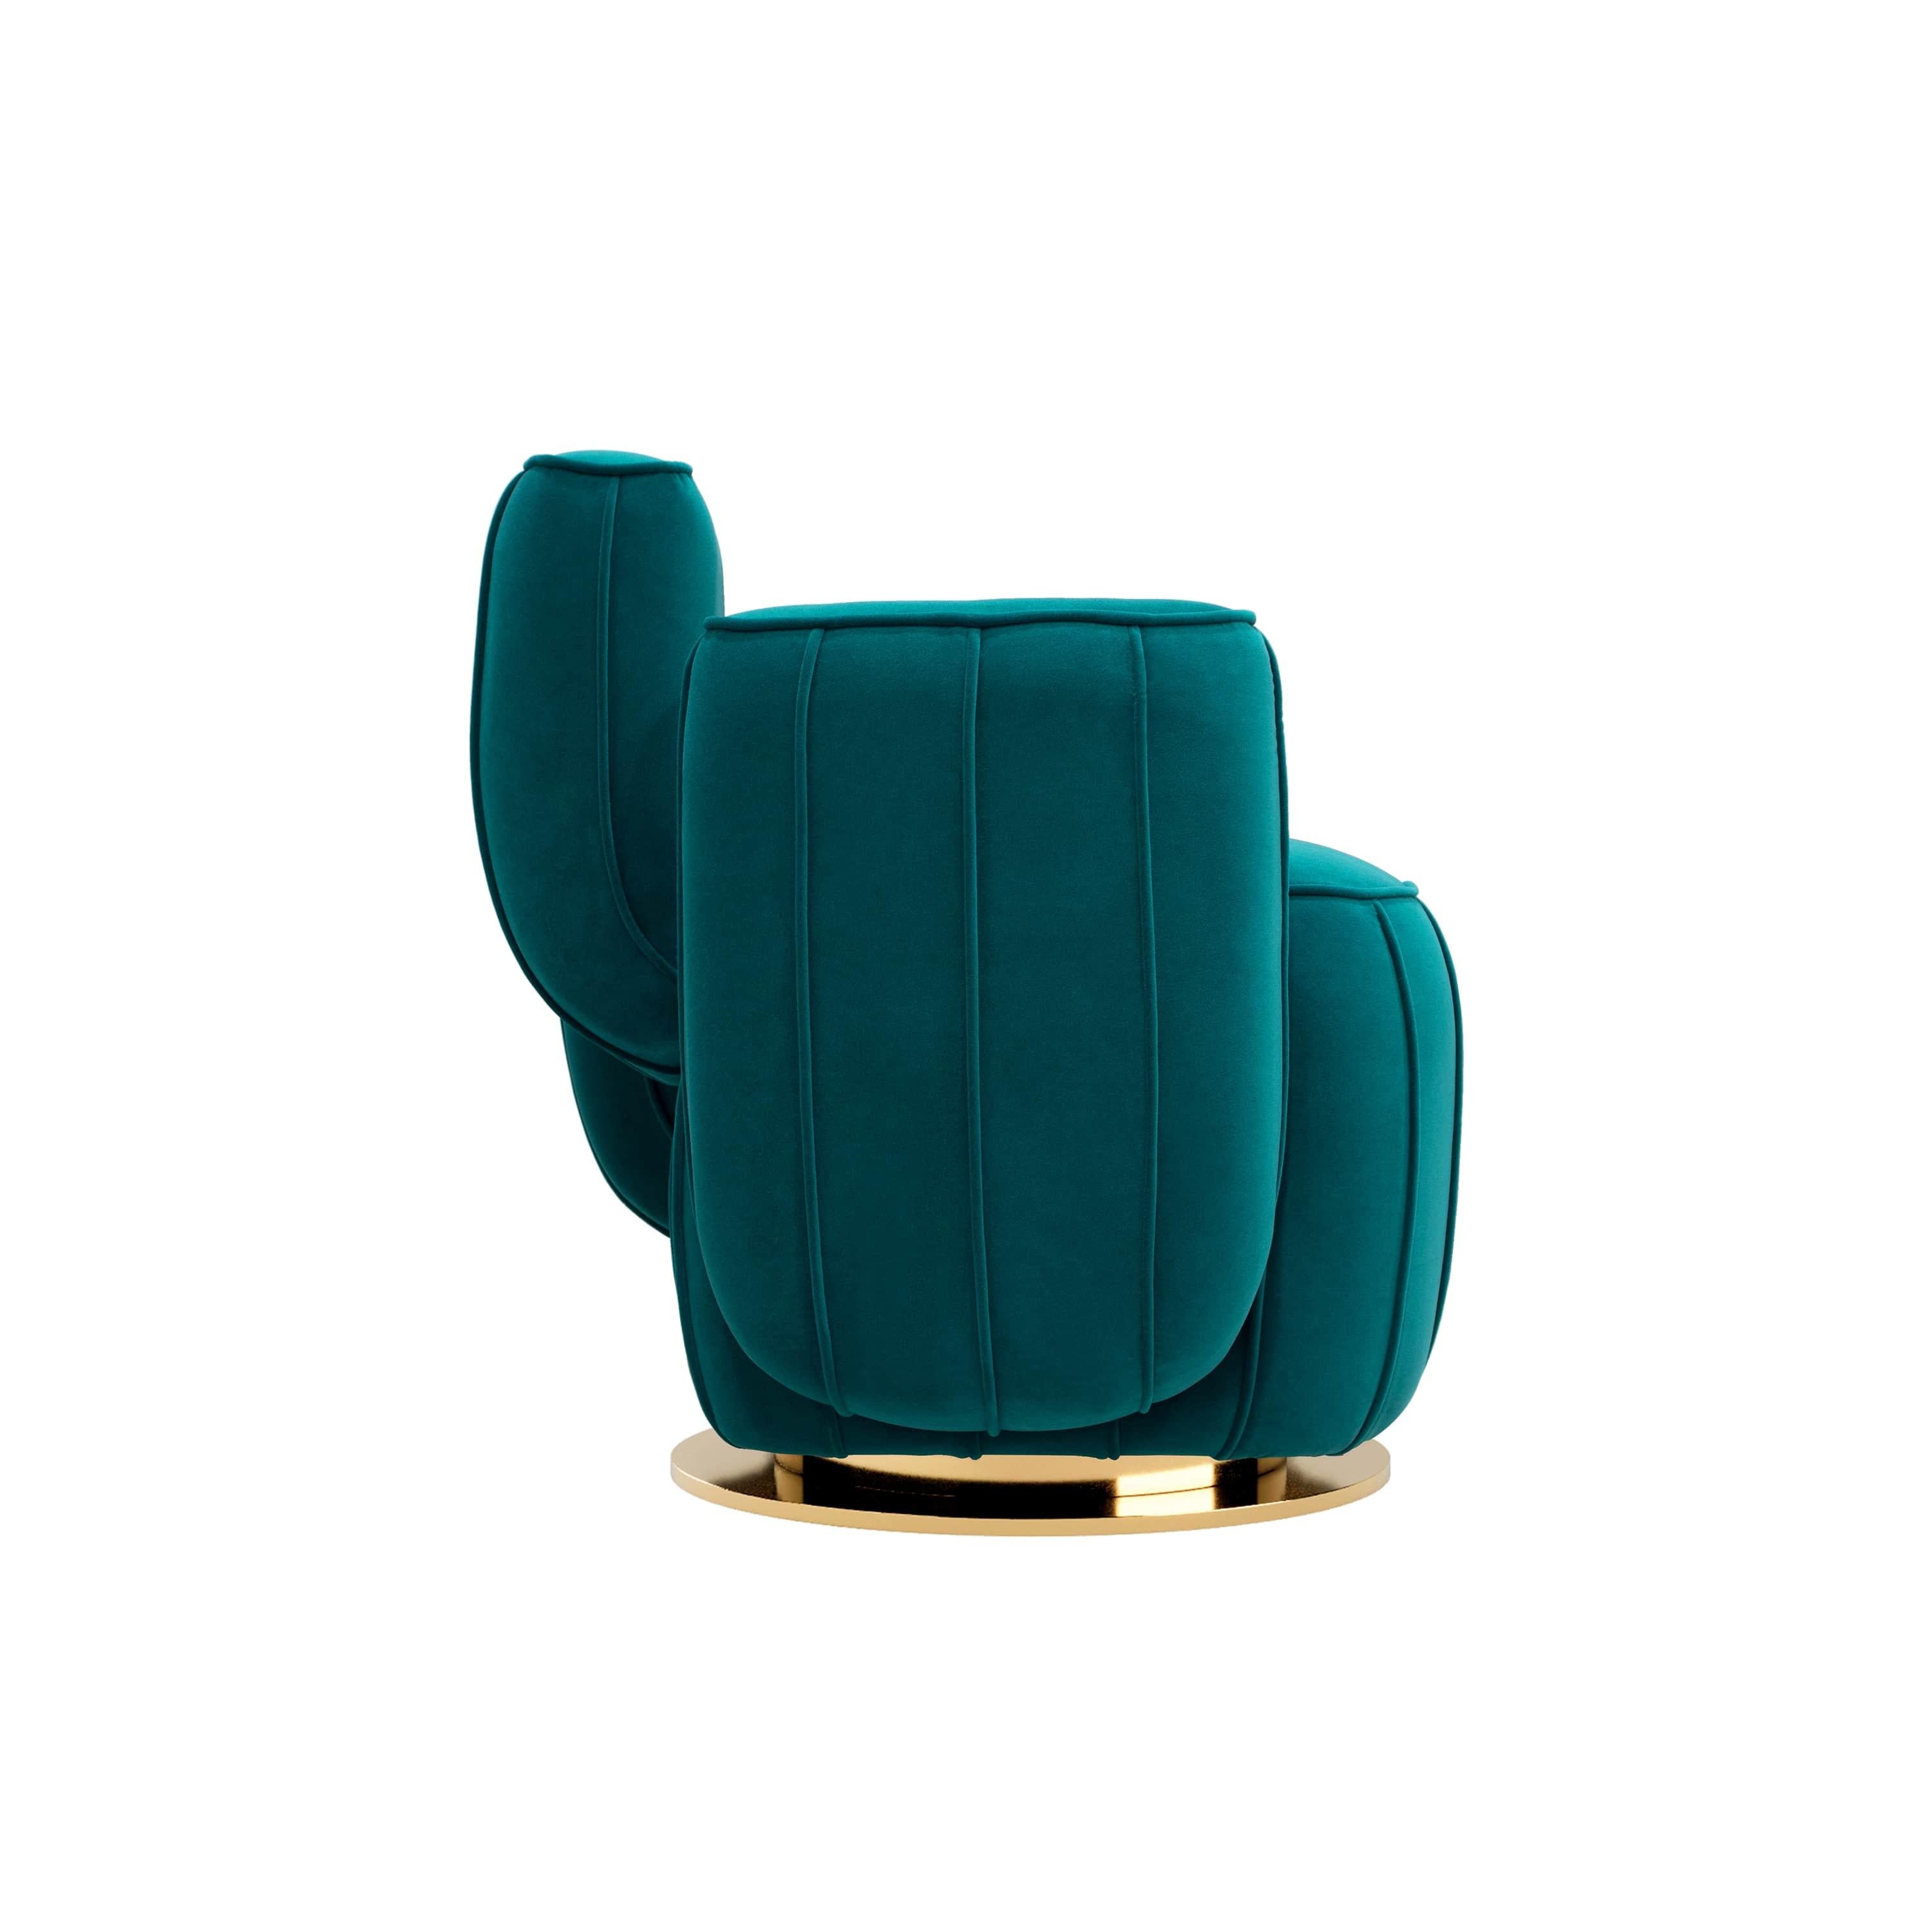 Modern blue velvet armchair cactus shape with gold swivel base polished brass

Ajui Armchair is a luxury armchair that features an artsy interpretation of a cactus and a swivel base. It is upholstered in velvet with structure and base in polished